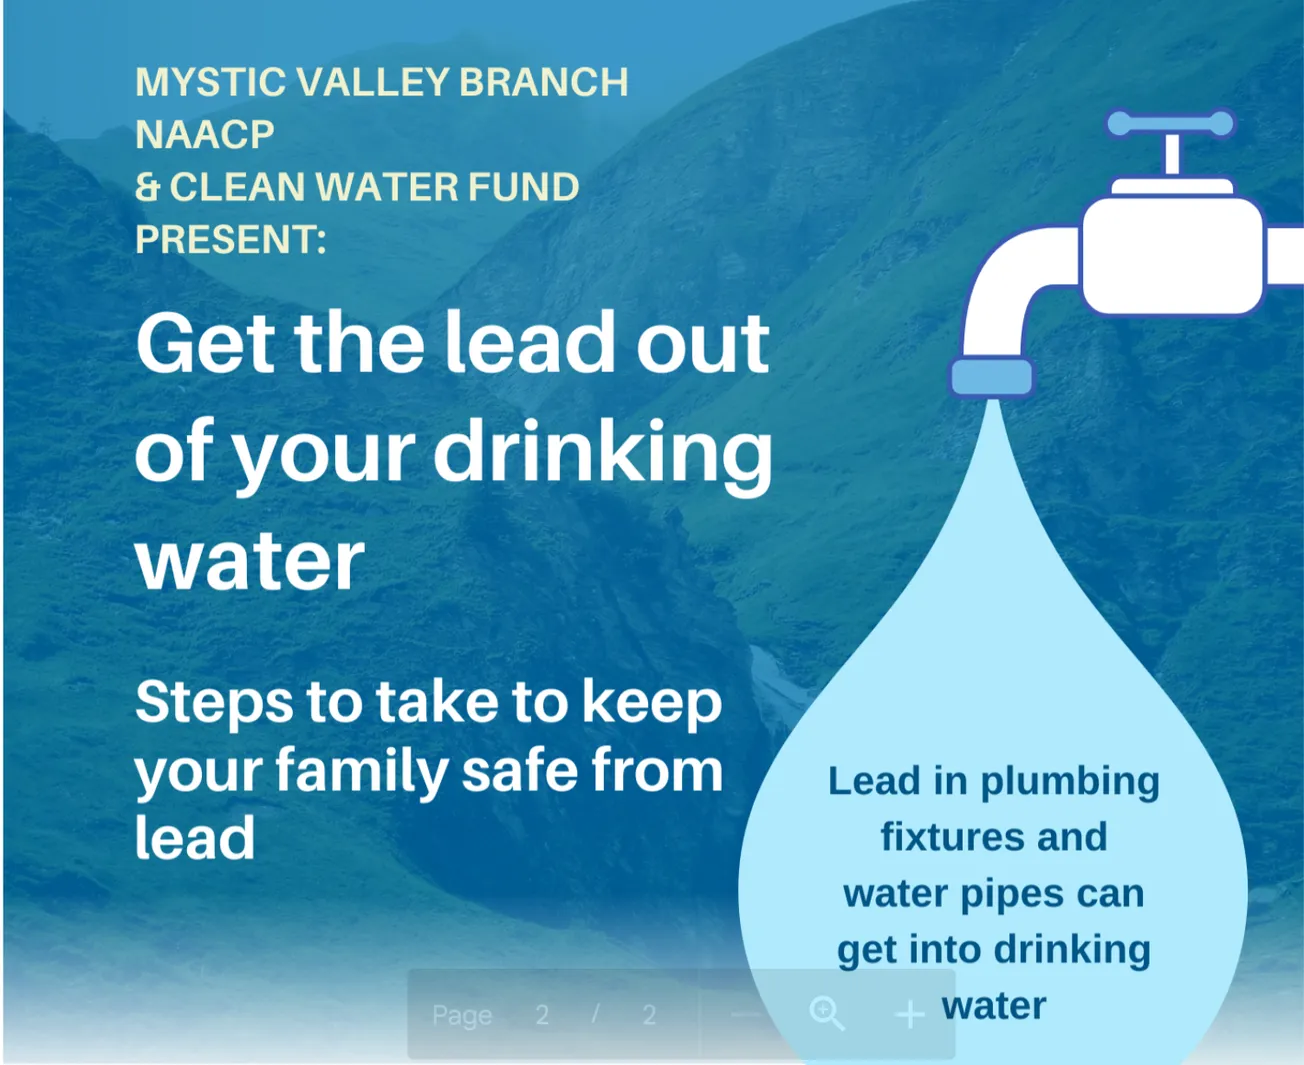 #Get the Lead Out of Our Drinking Water online presentation takes place May 11